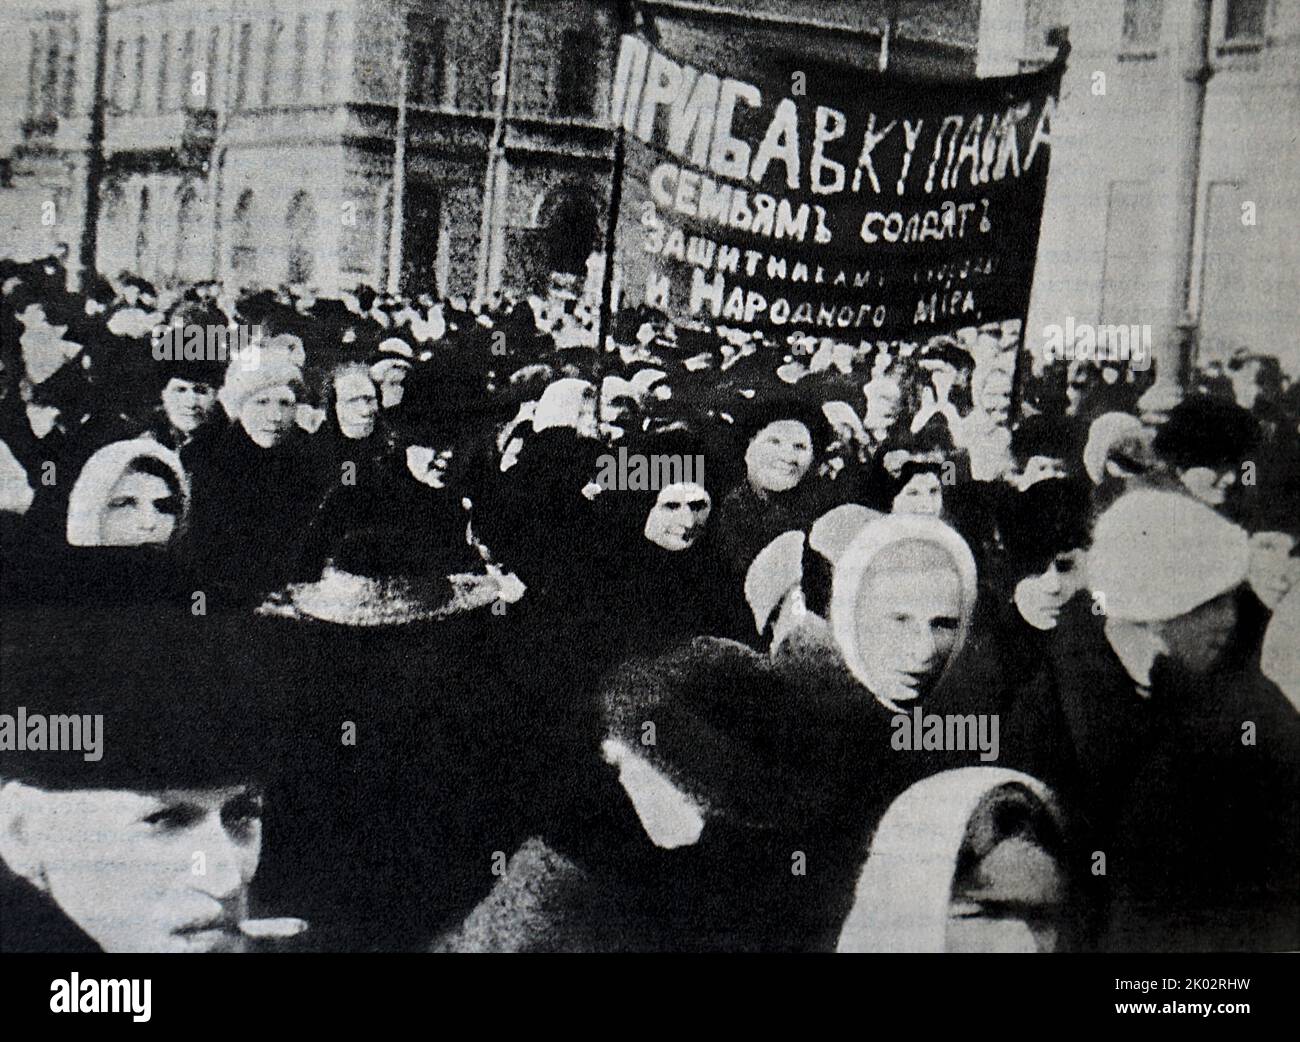 Demonstration of Petrograd workers on Women's Day on February 23 (March 8) 1917, which became the first day of the February Revolution. Stock Photo